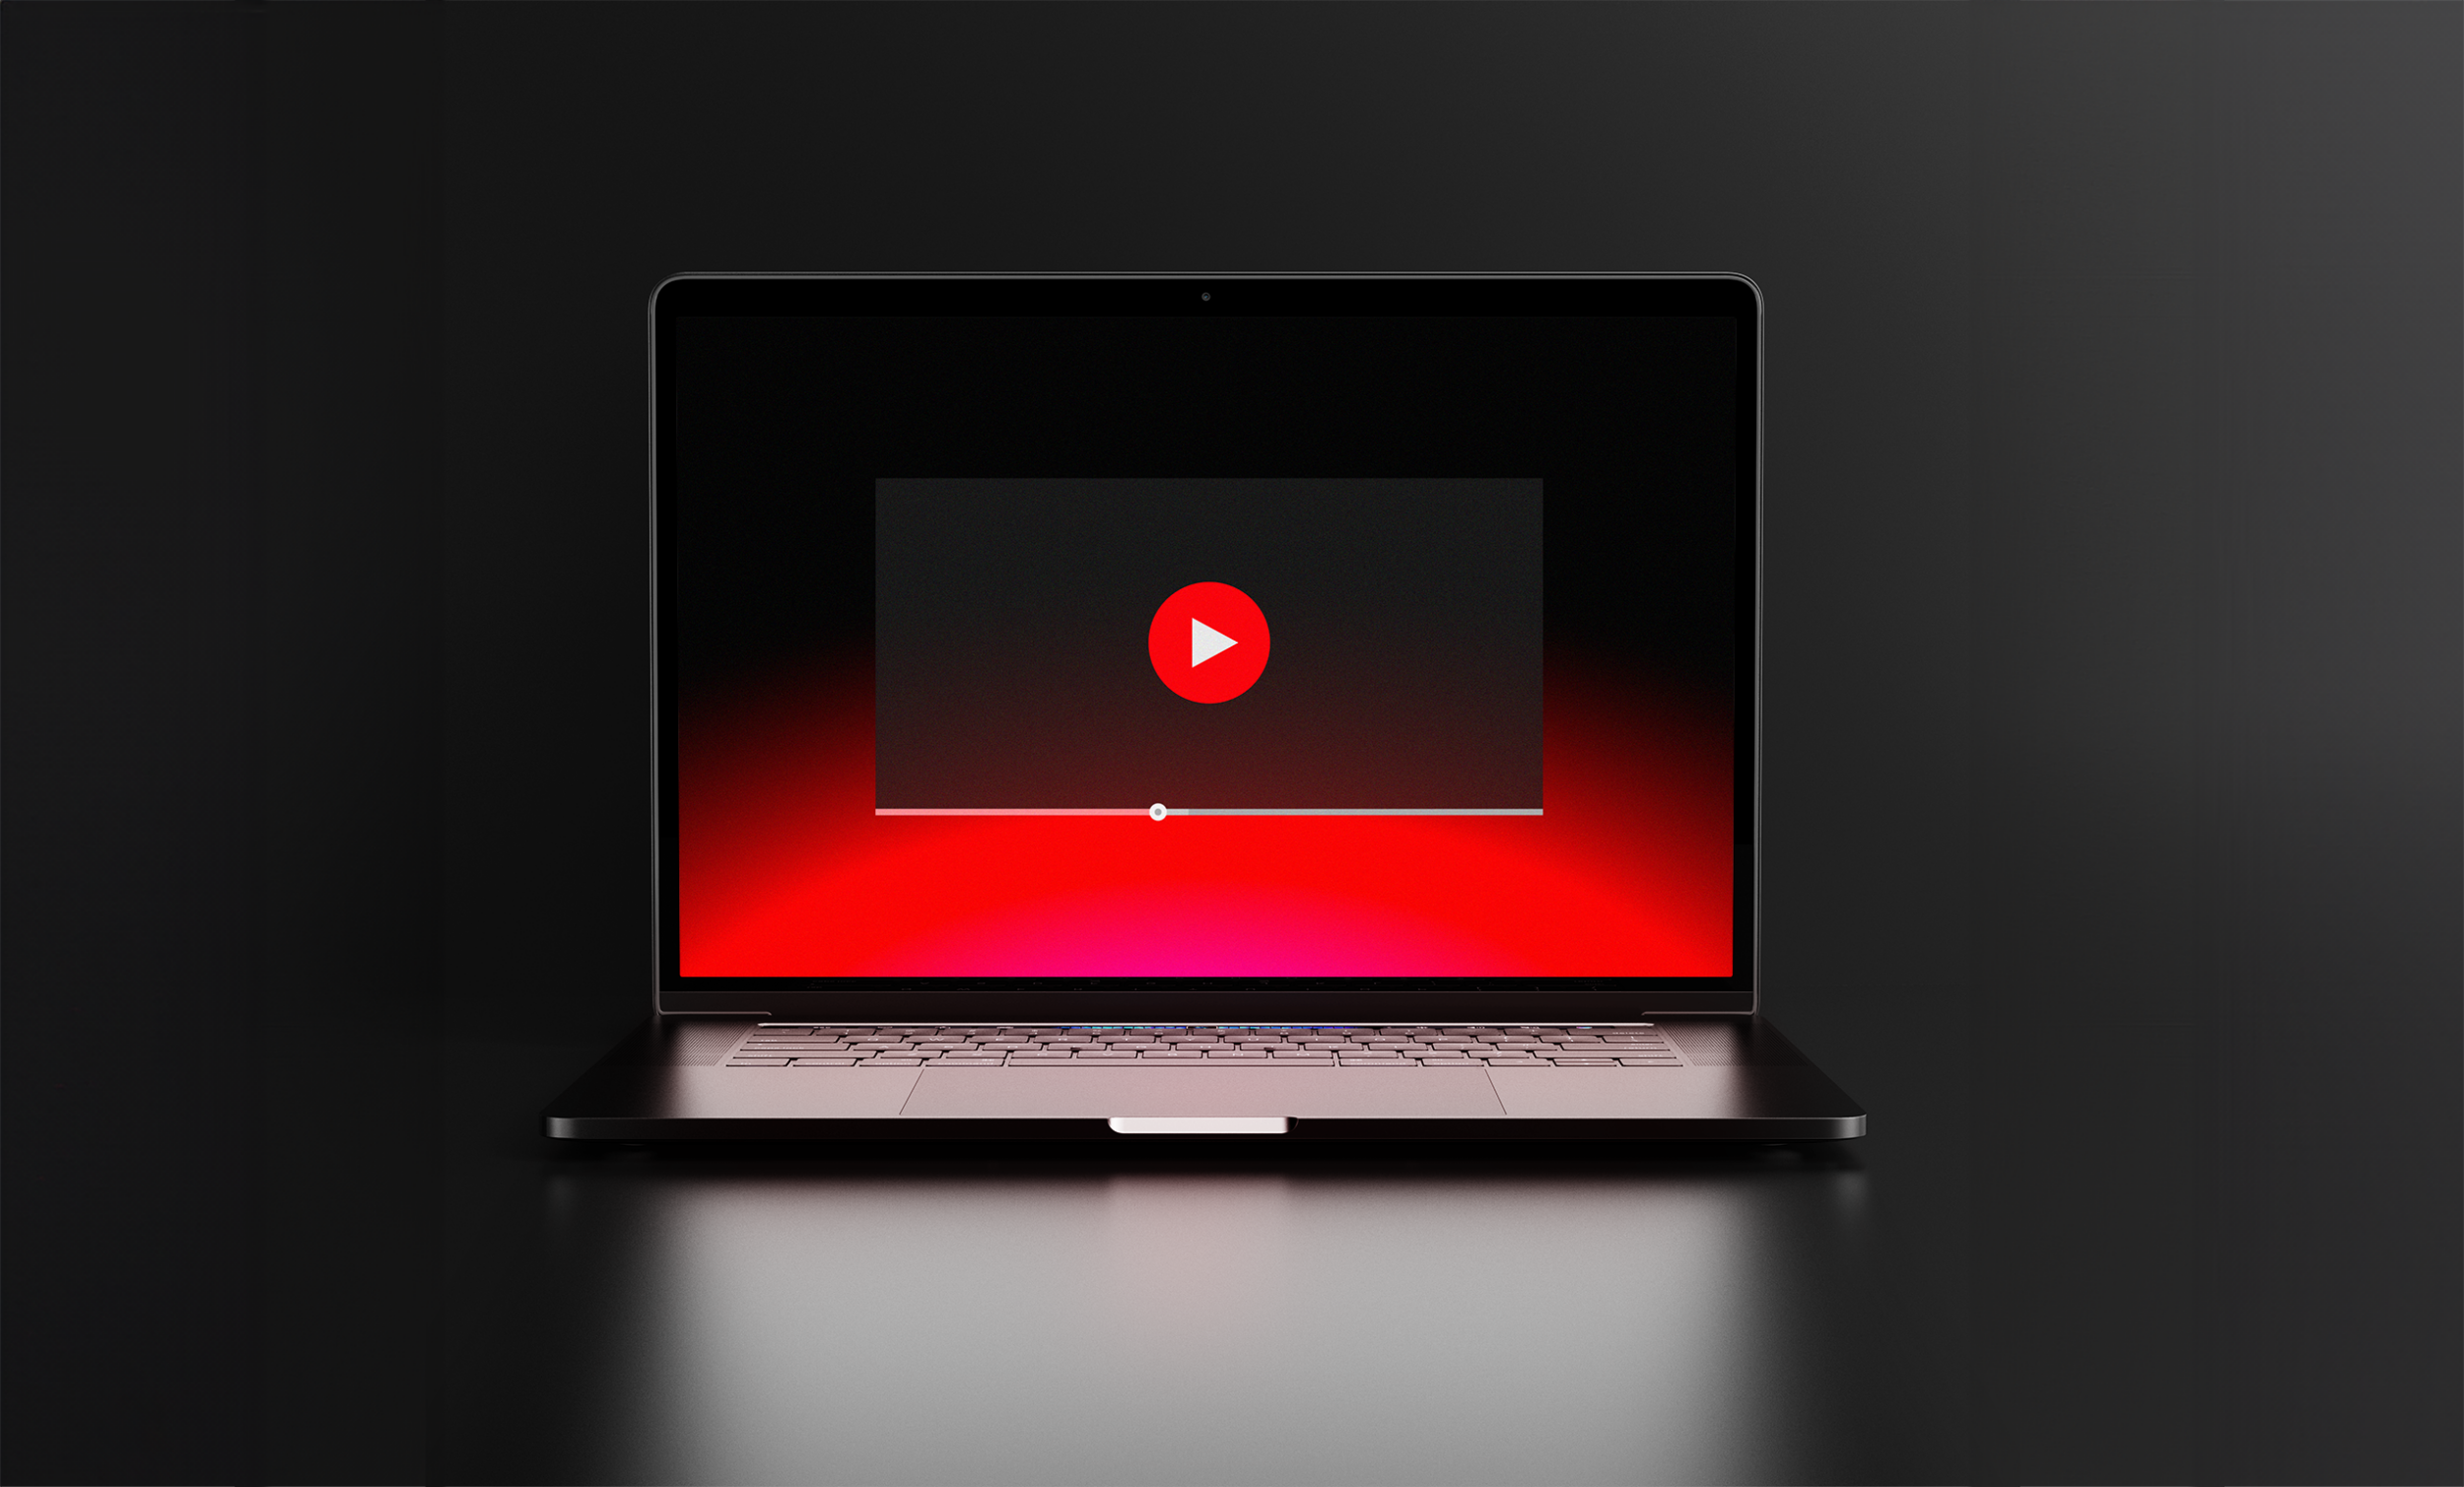 Laptop on a dark surface with a video player on the screen, highlighted by a red glow.